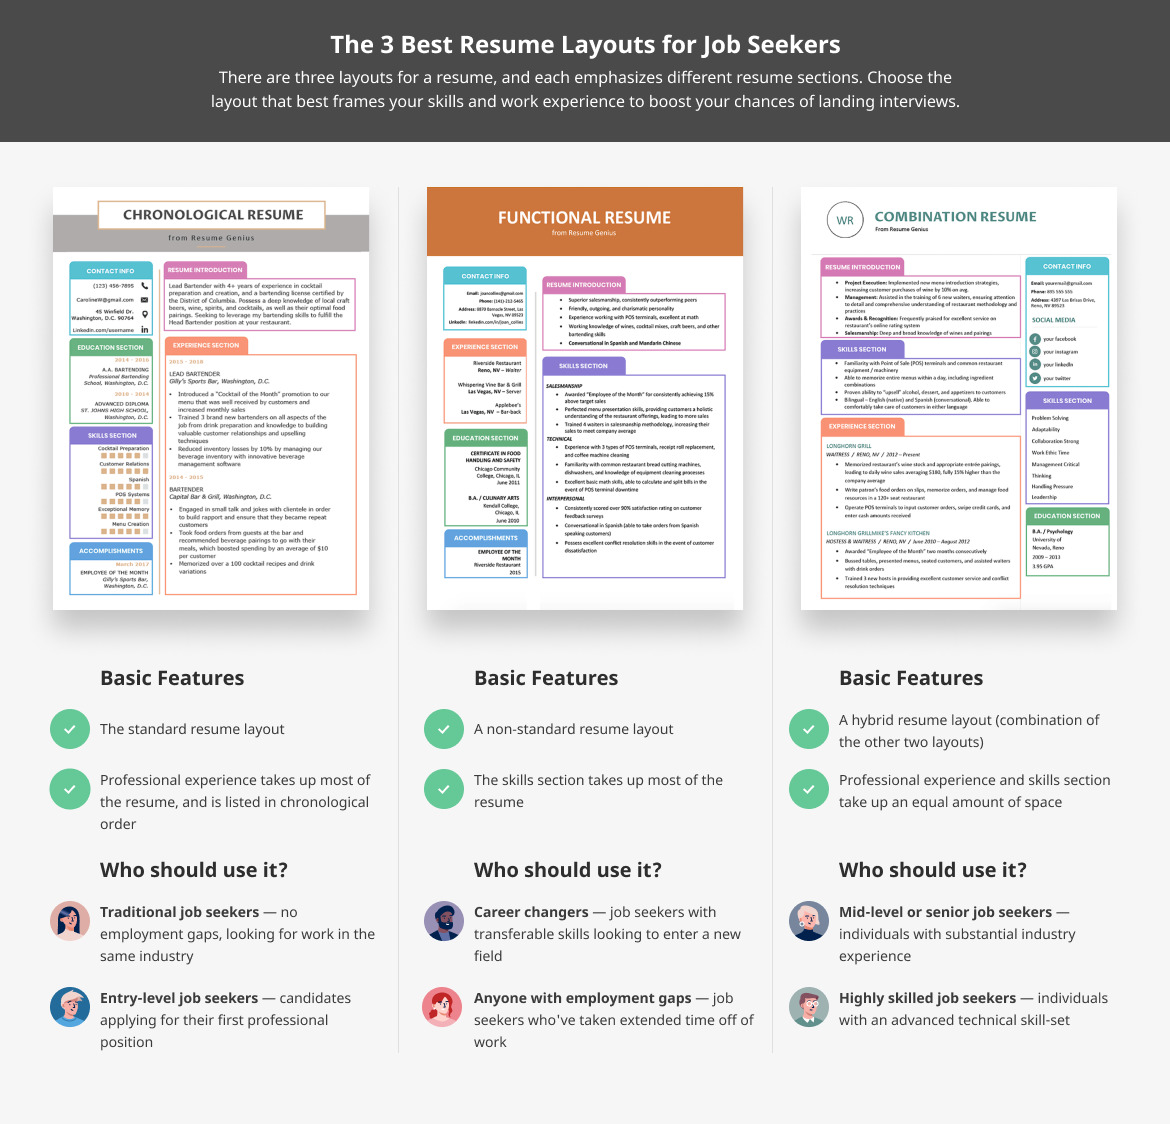 An infographic that shows the three best layouts for a resume, with a brief description of each one's basic features and who should use them.